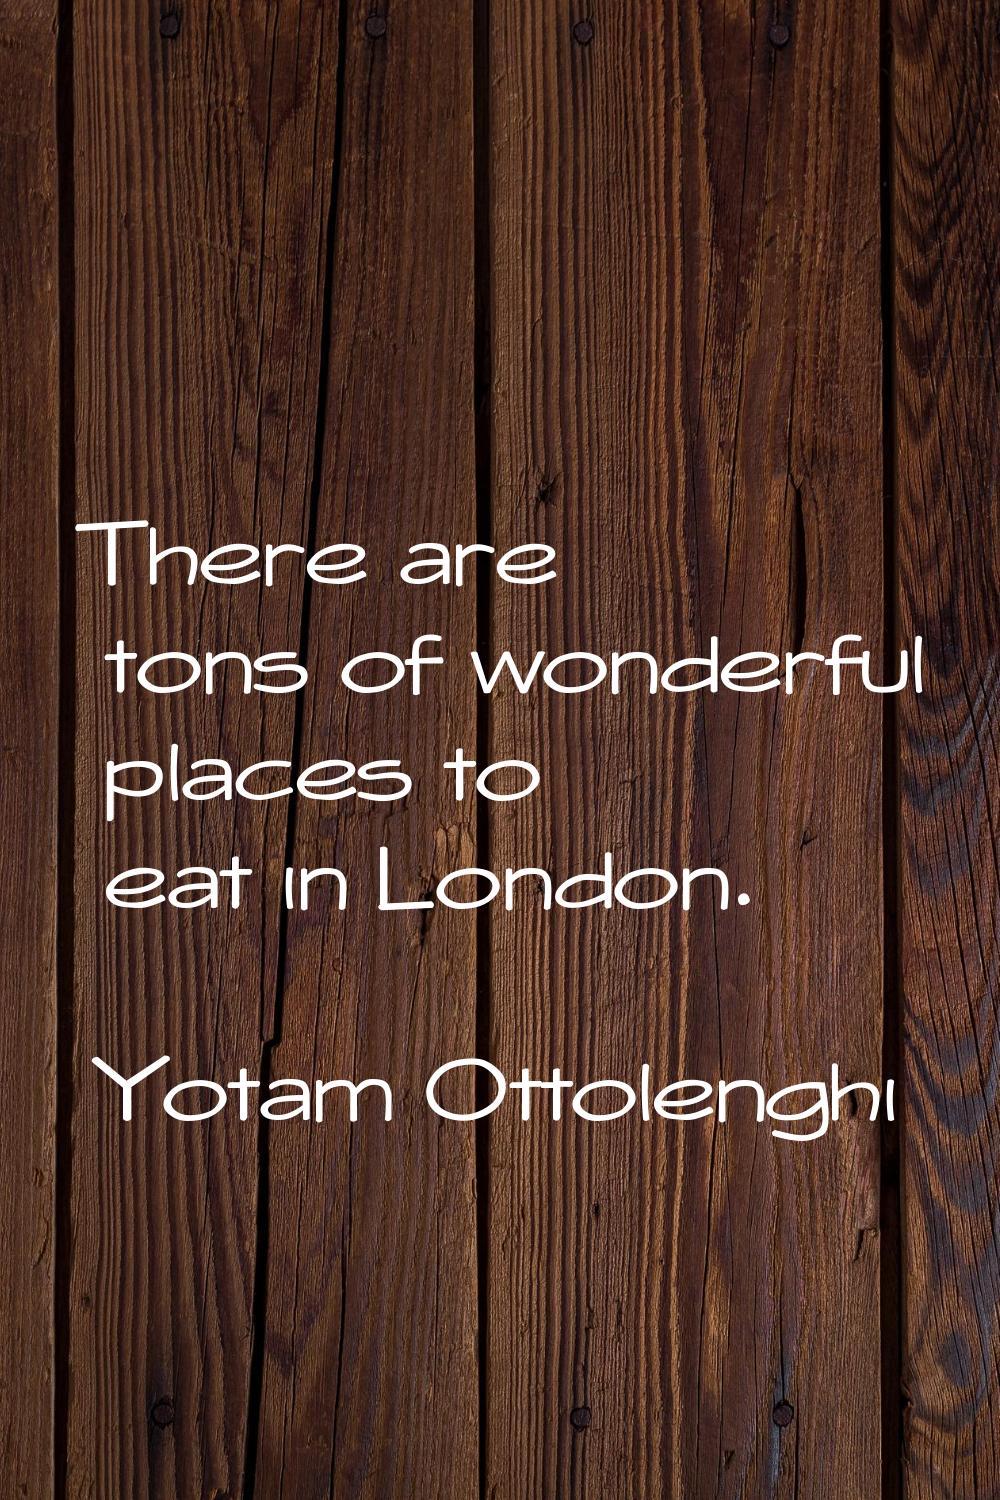 There are tons of wonderful places to eat in London.